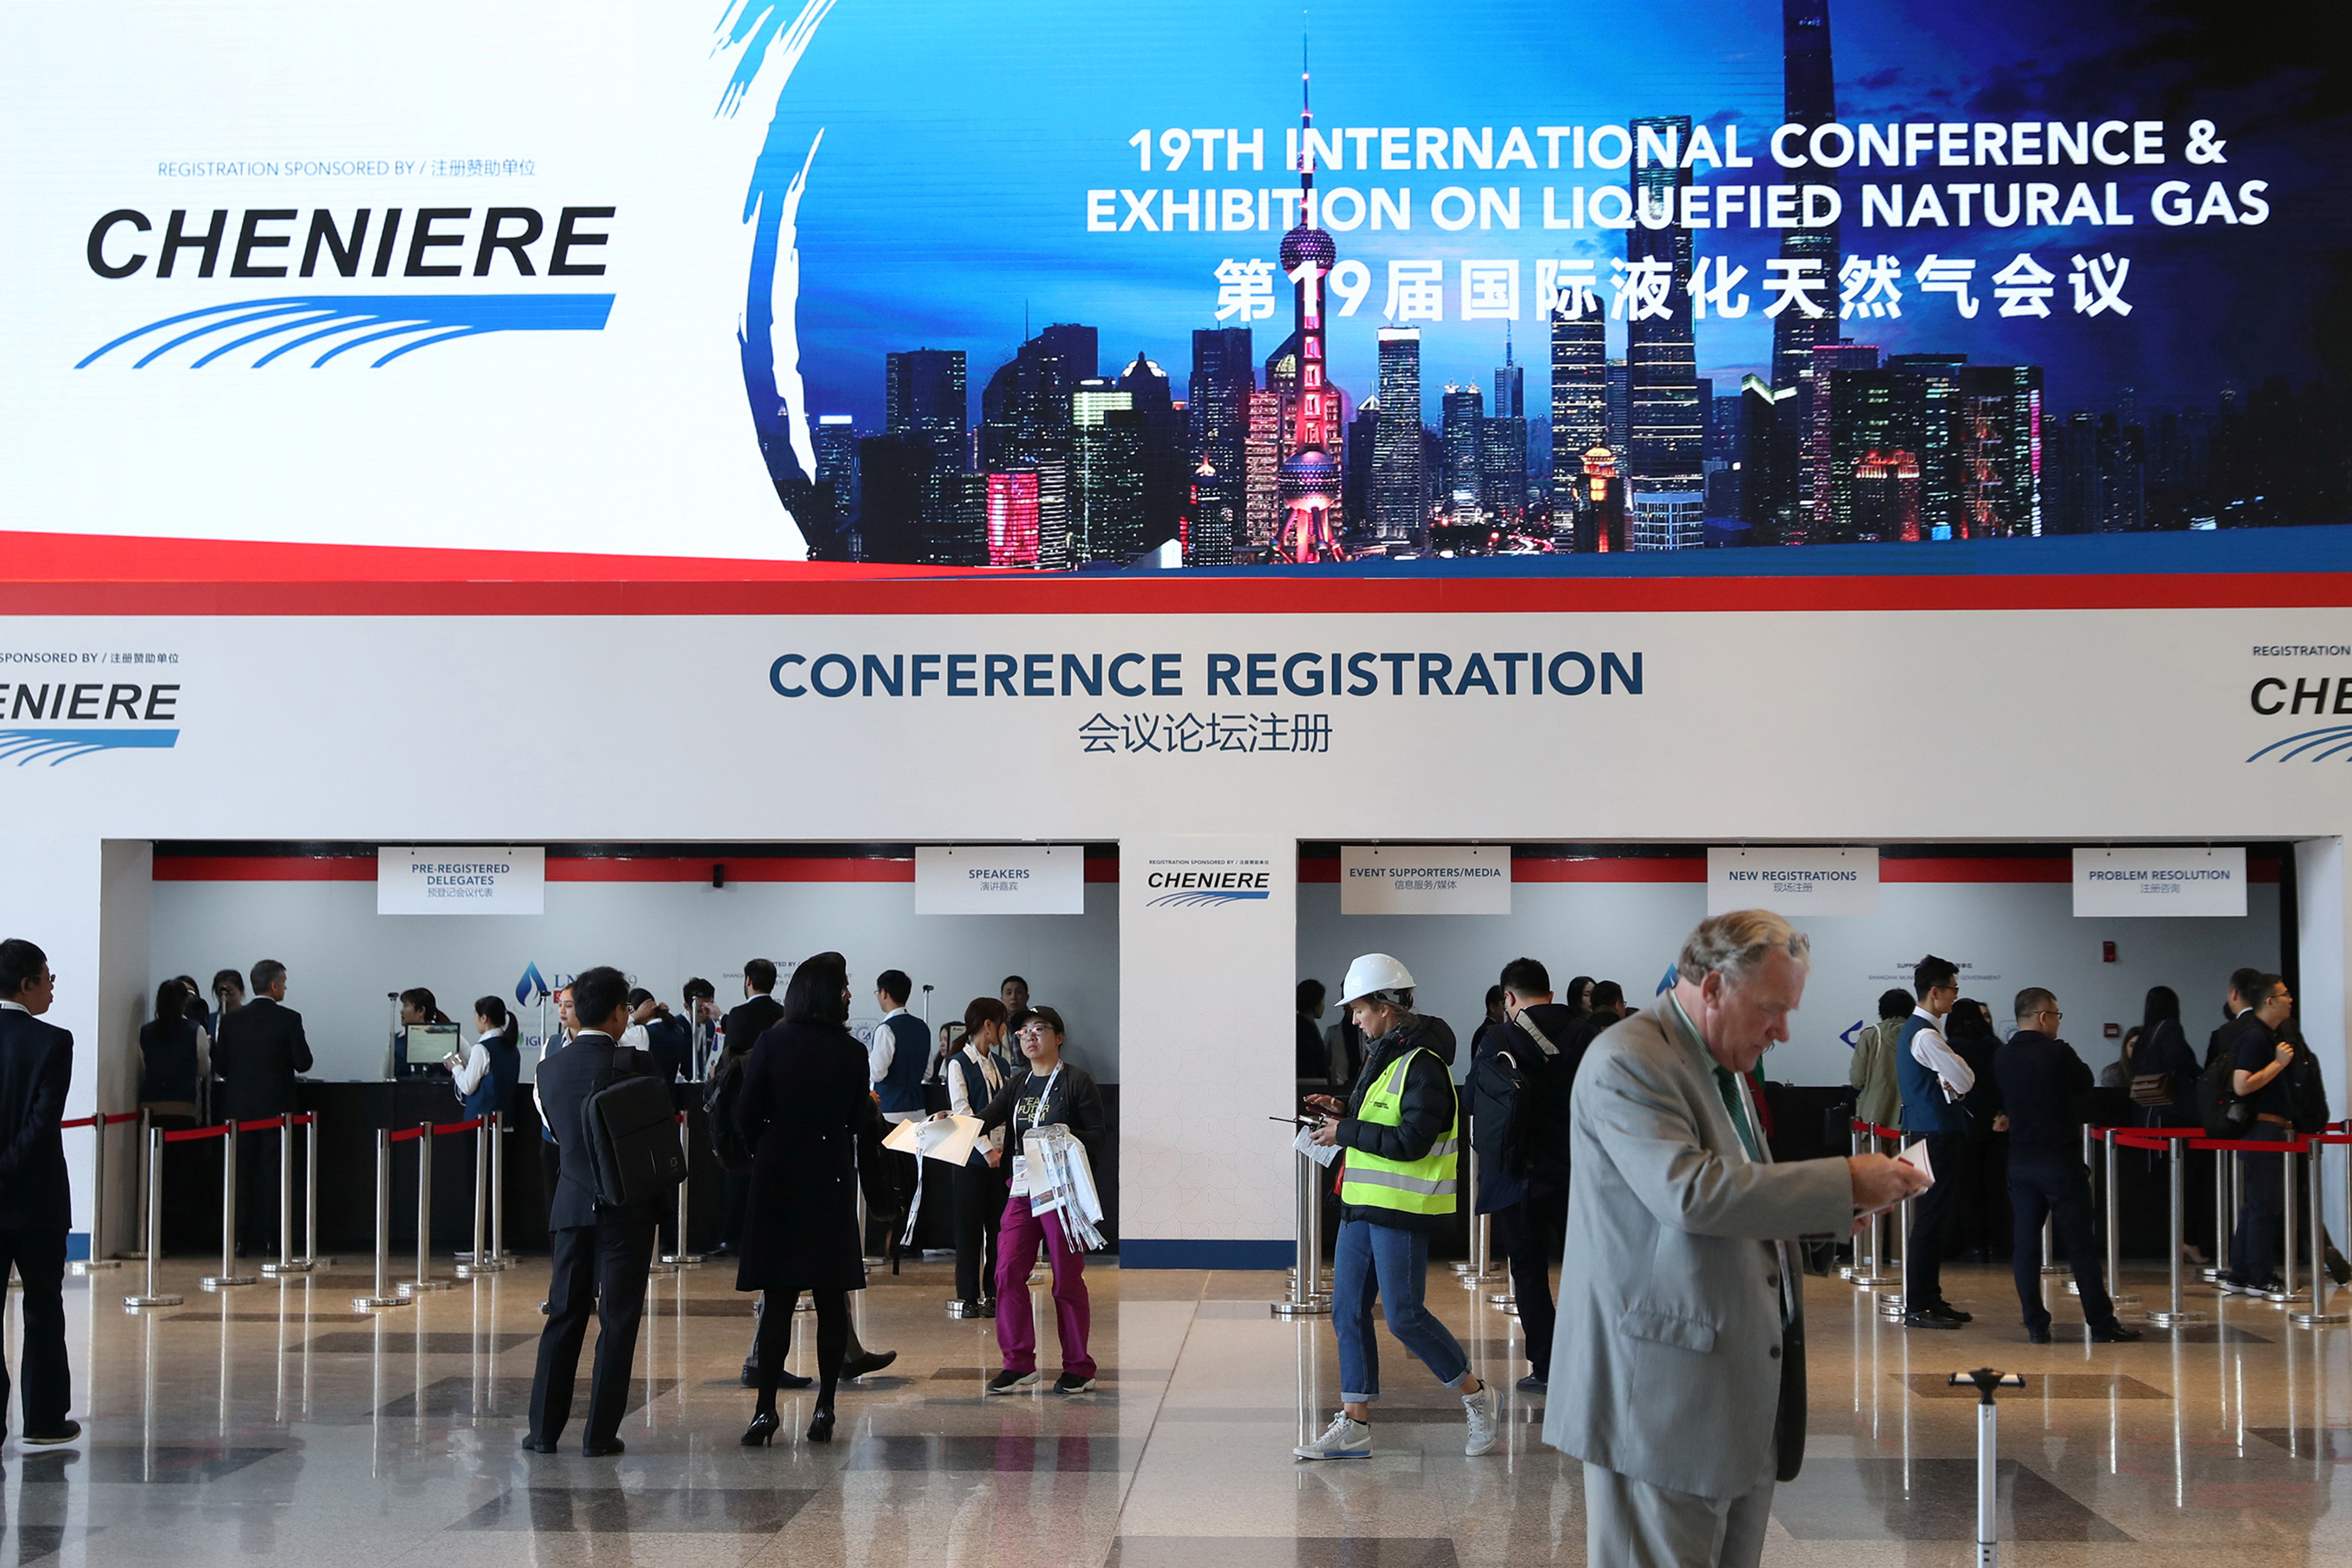 Sign of U.S LNG company Cheniere is seen at the registration counter at the International Conference & Exhibition on Liquefied Natural Gas (LNG2019) in Shanghai